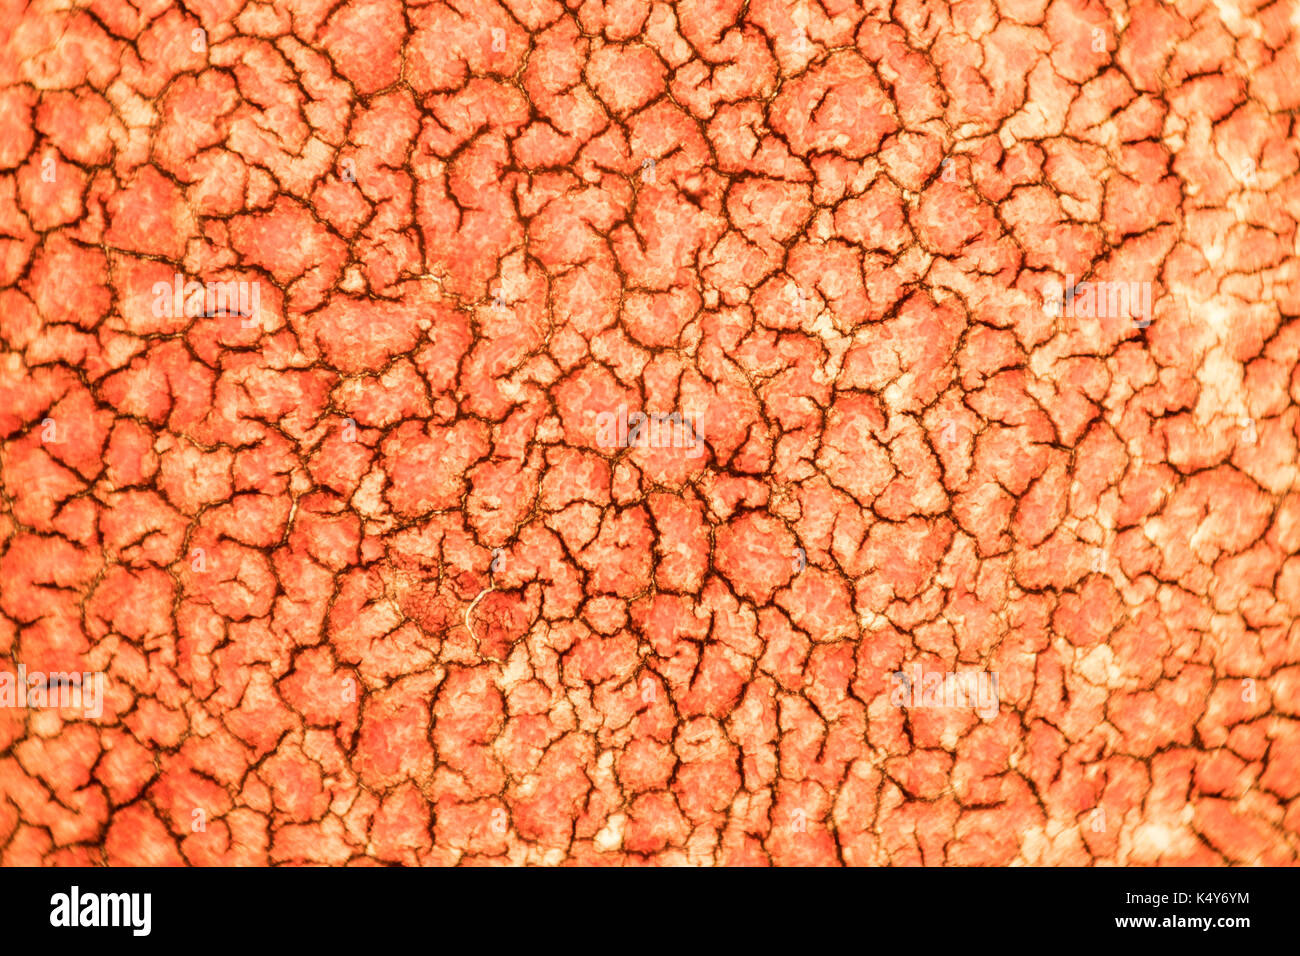 Solidified coagulated blood seen on a 100x microscope view. Blood smear under microscope present neutrophils and red blood cells Stock Photo